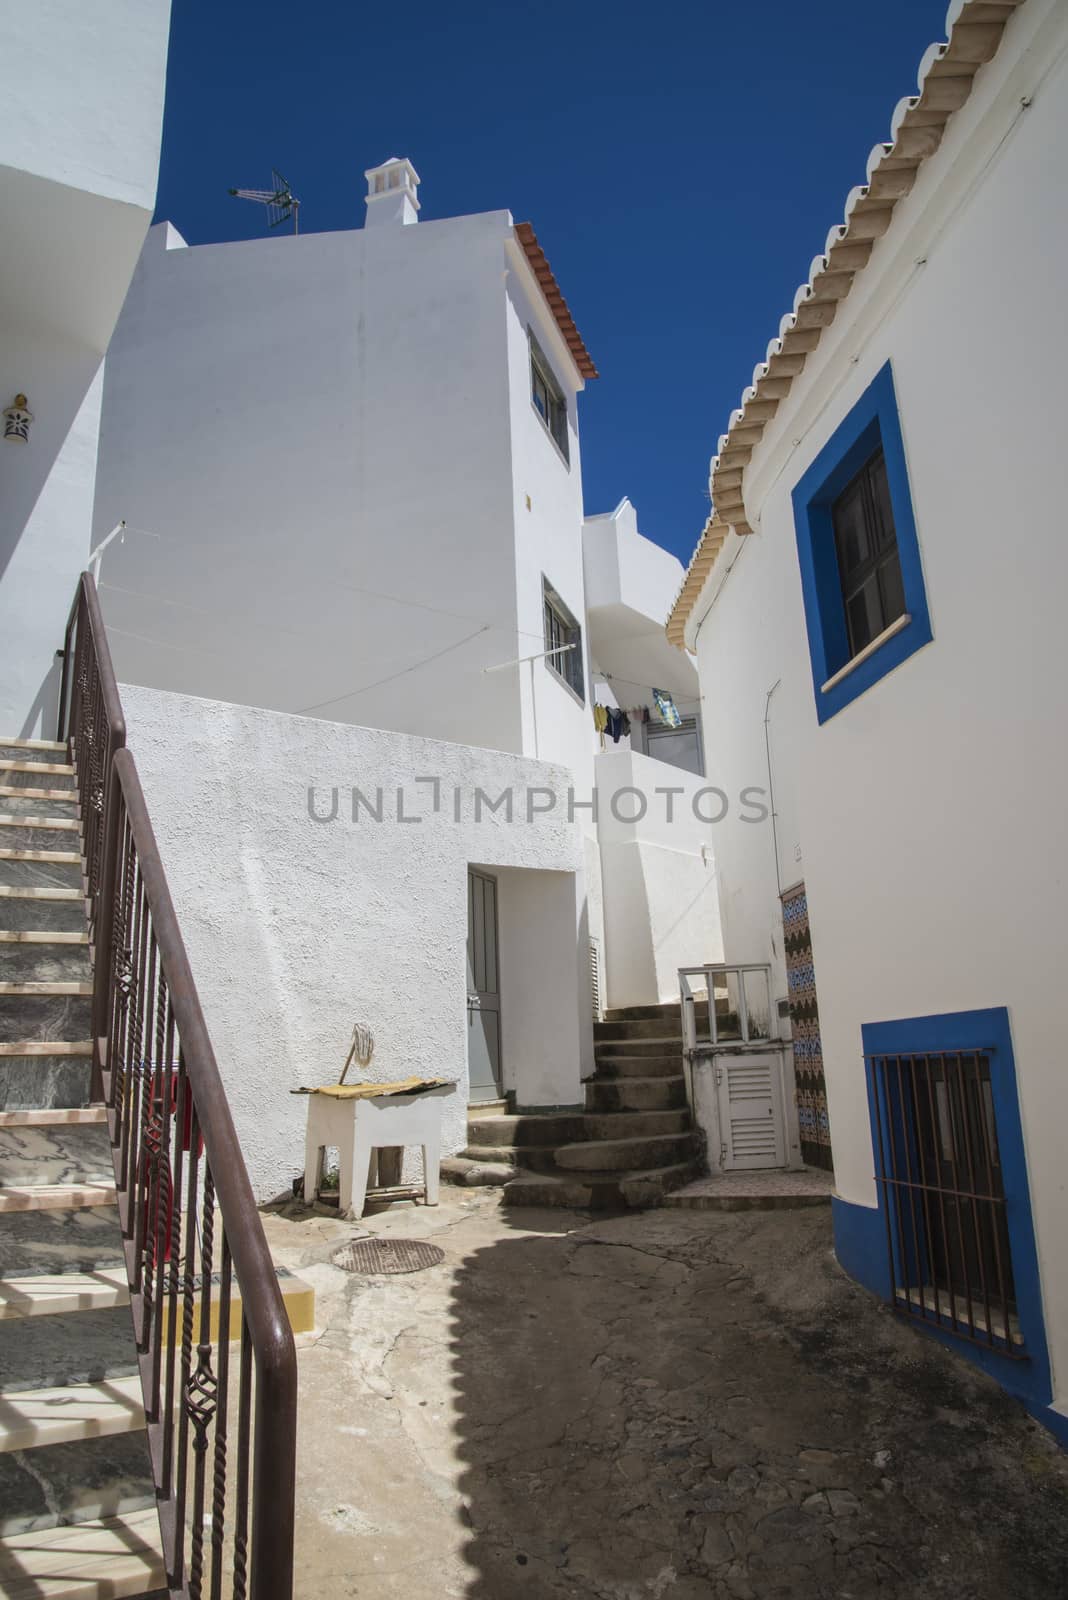 narrow streets and painted white houses in burgau by steirus